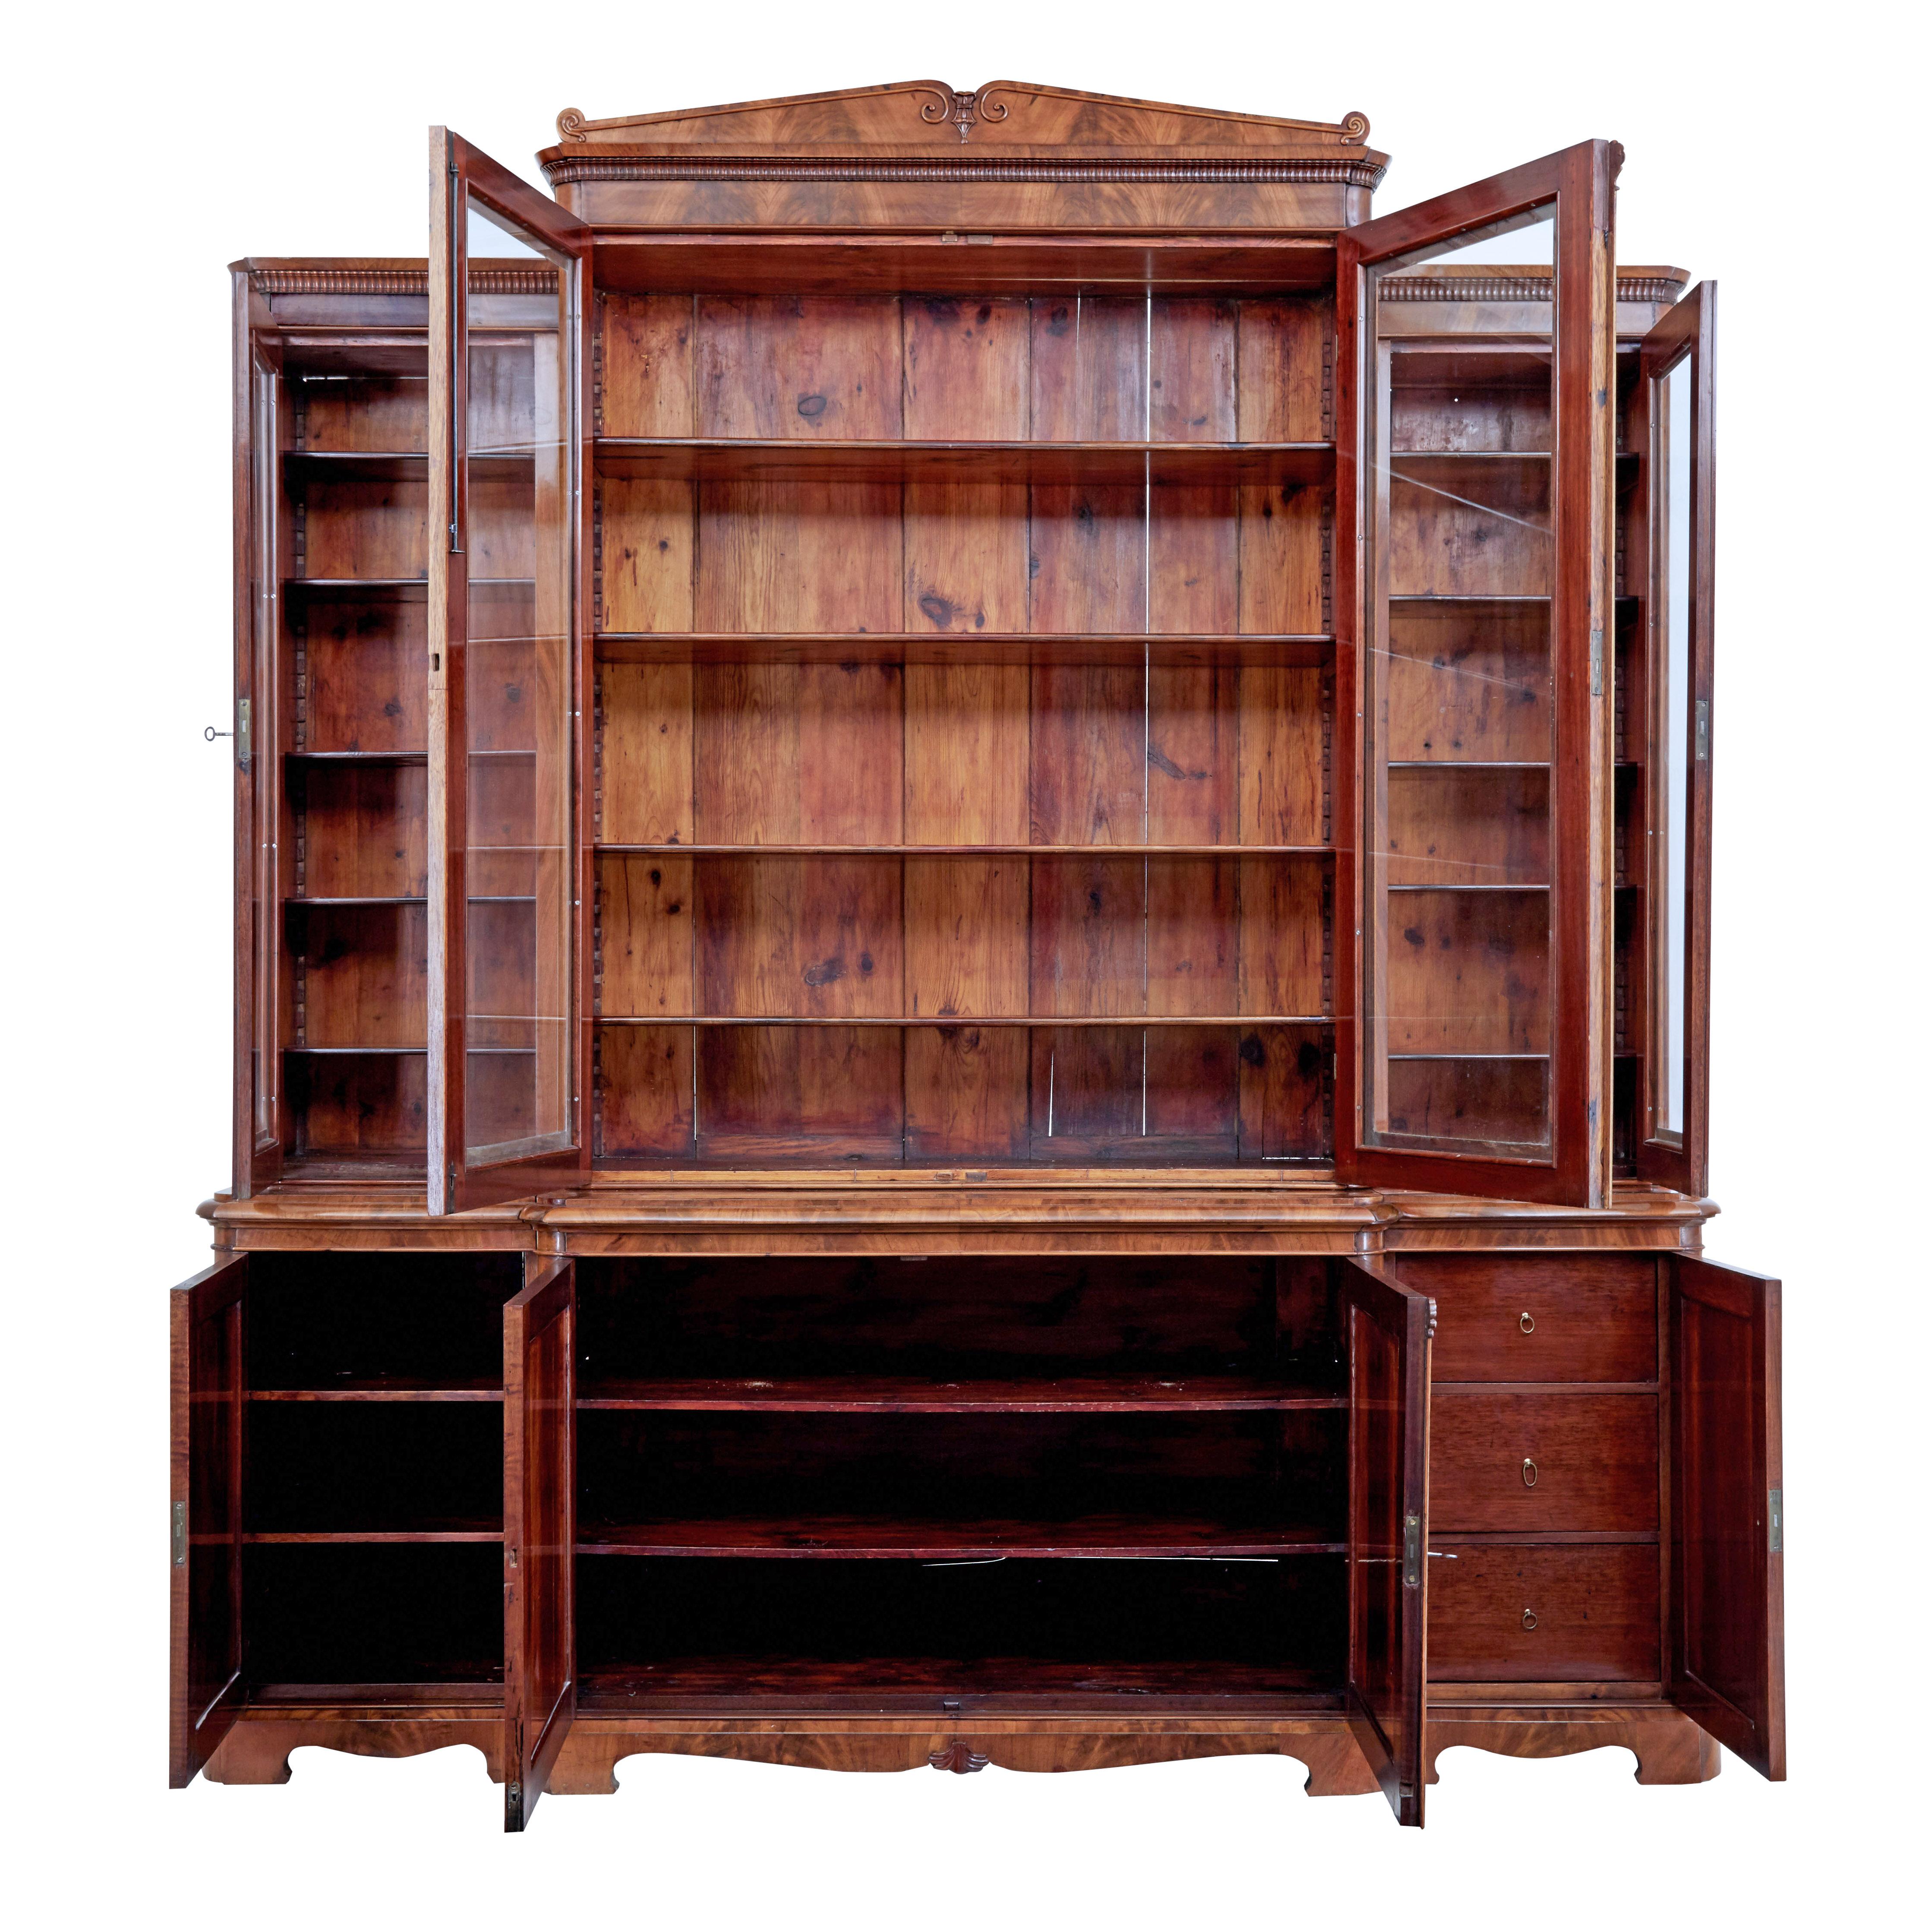 Early 19th century Scandinavian empire flame mahogany breakfront bookcase circa 1820.

Stunning bookcase of grand proportions veneered in golden flame mahogany. Bookcase comprises of 7 sections which screw together to. 3 sections to the base, 3